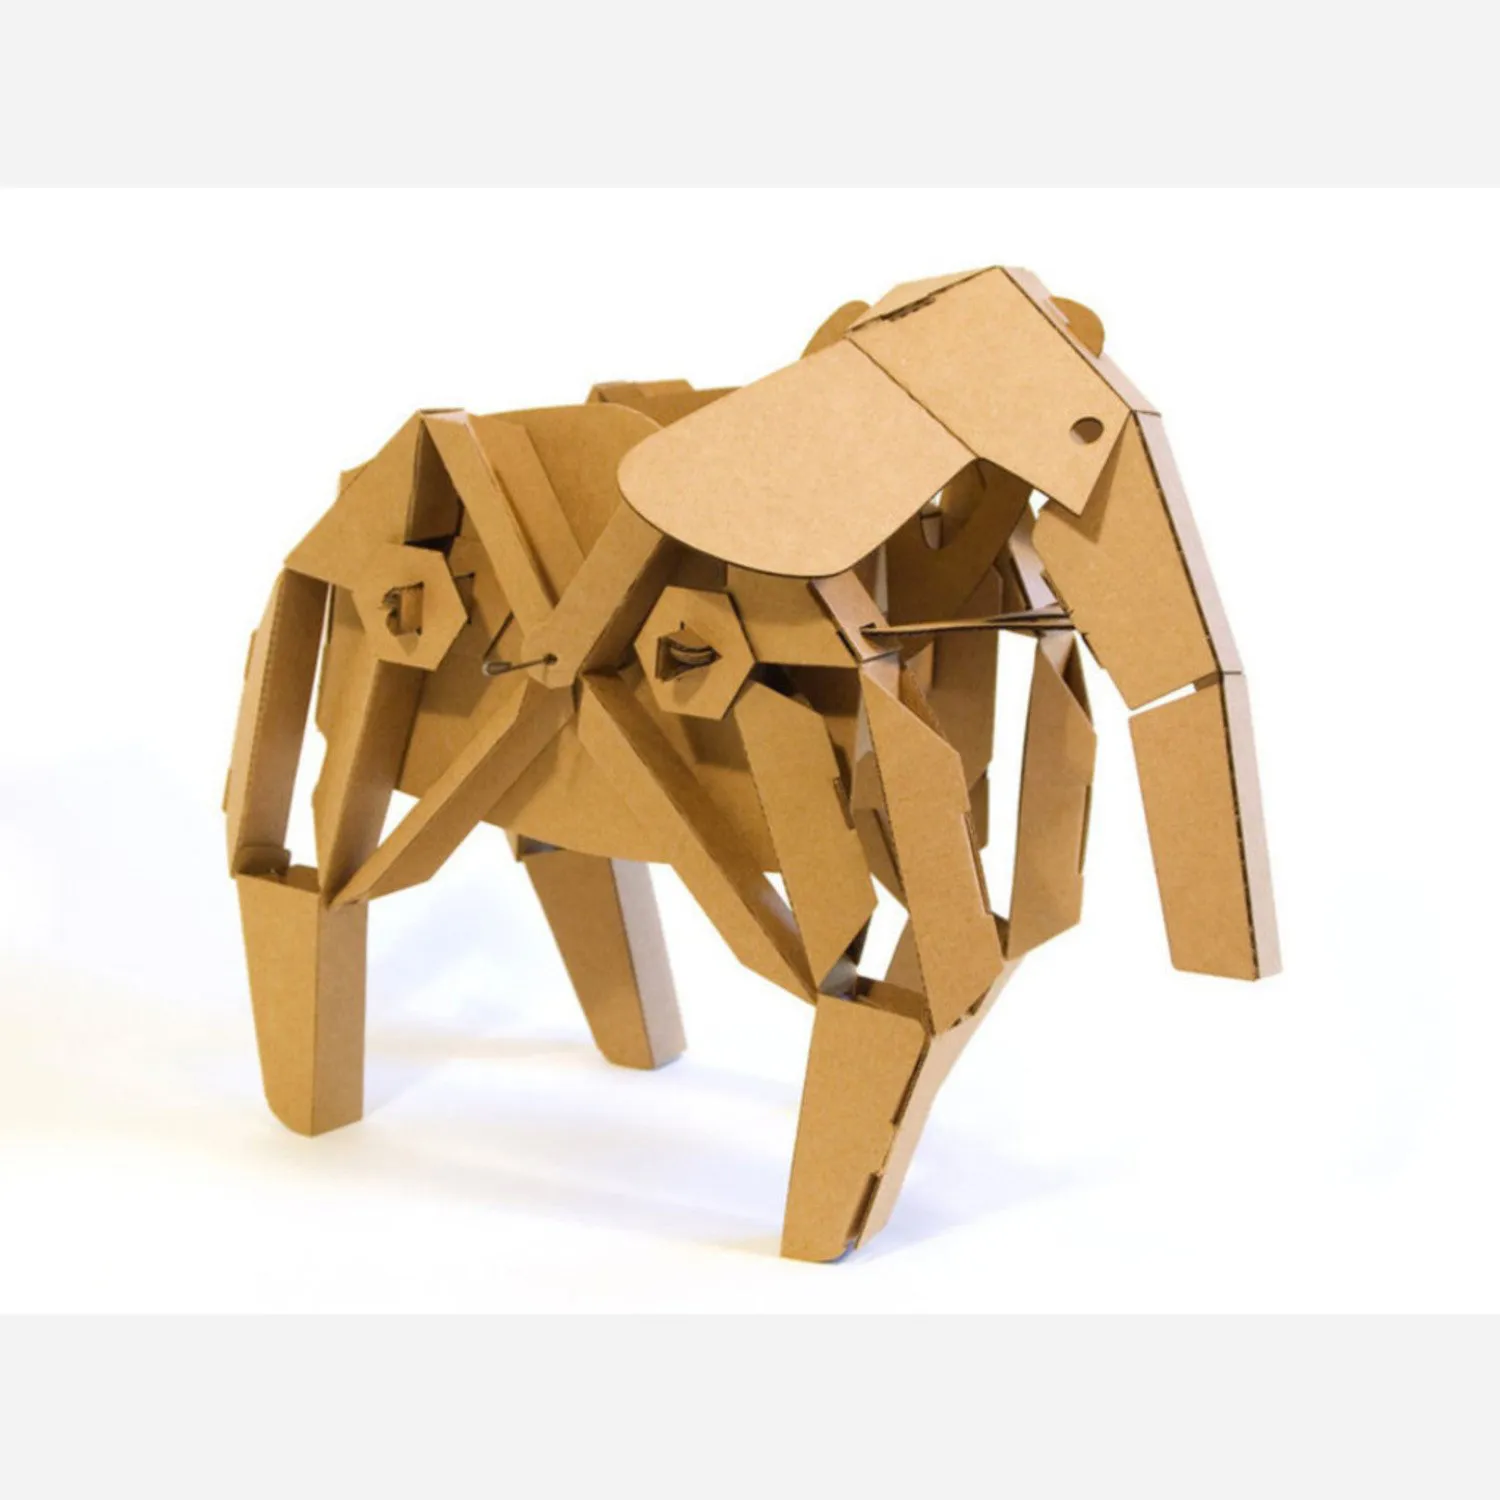 Photo of Elly the Elephant - Kinetic Creatures